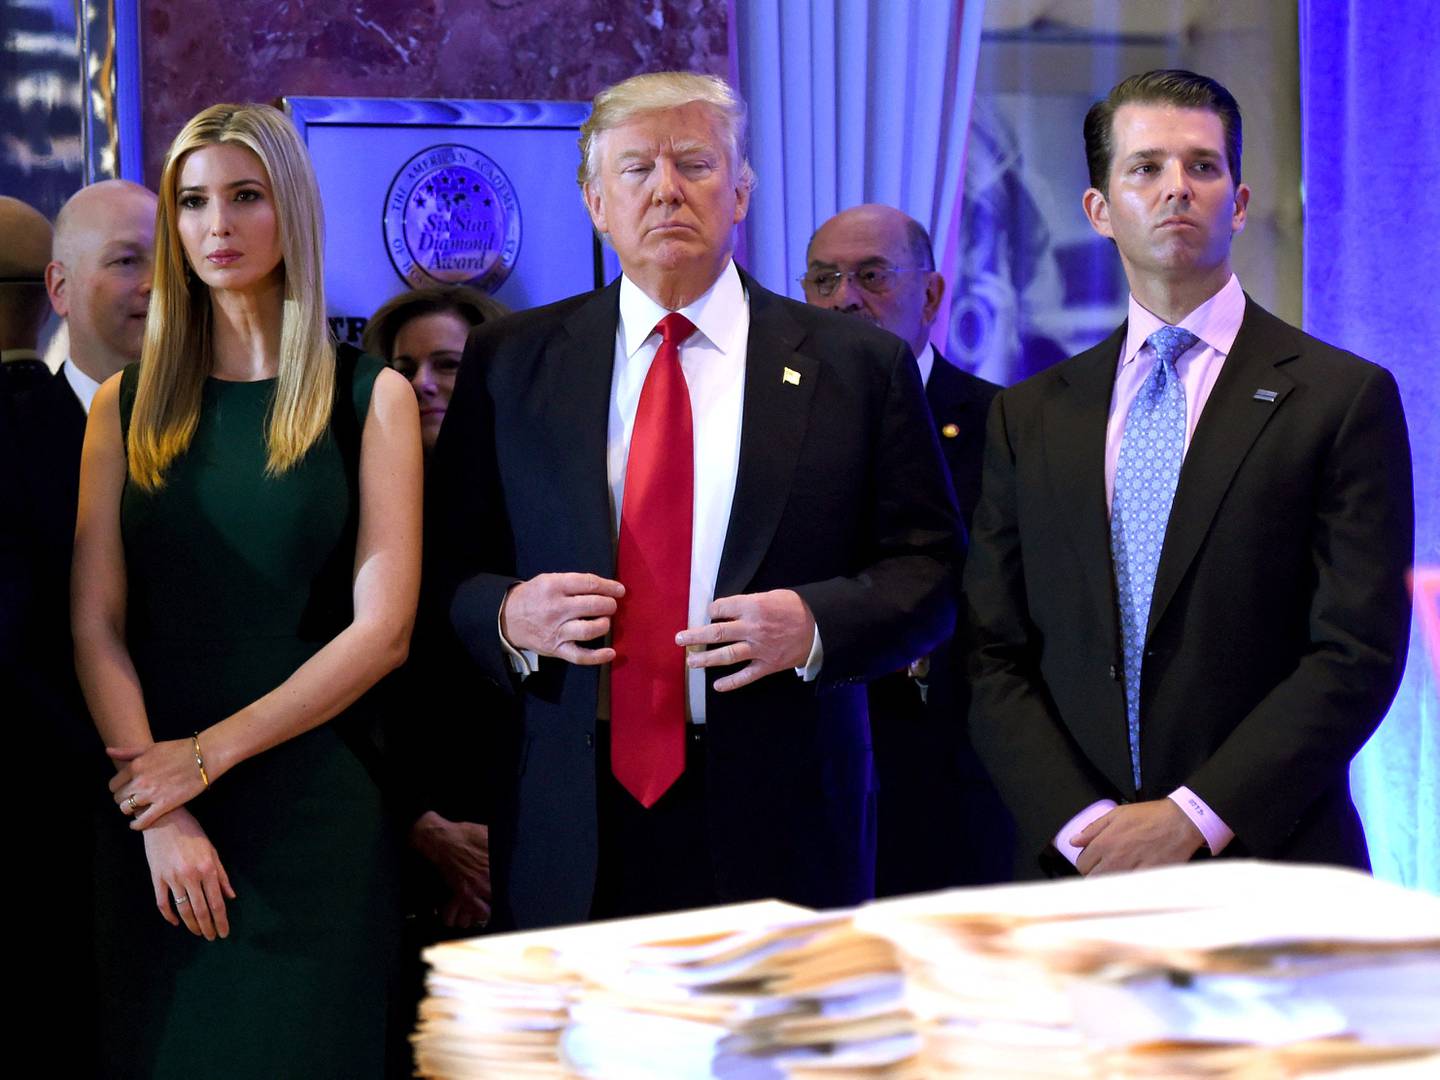 Donald Trump stands with his children Ivanka and Donald Jr during a press conference at Trump Tower in New York. AFP